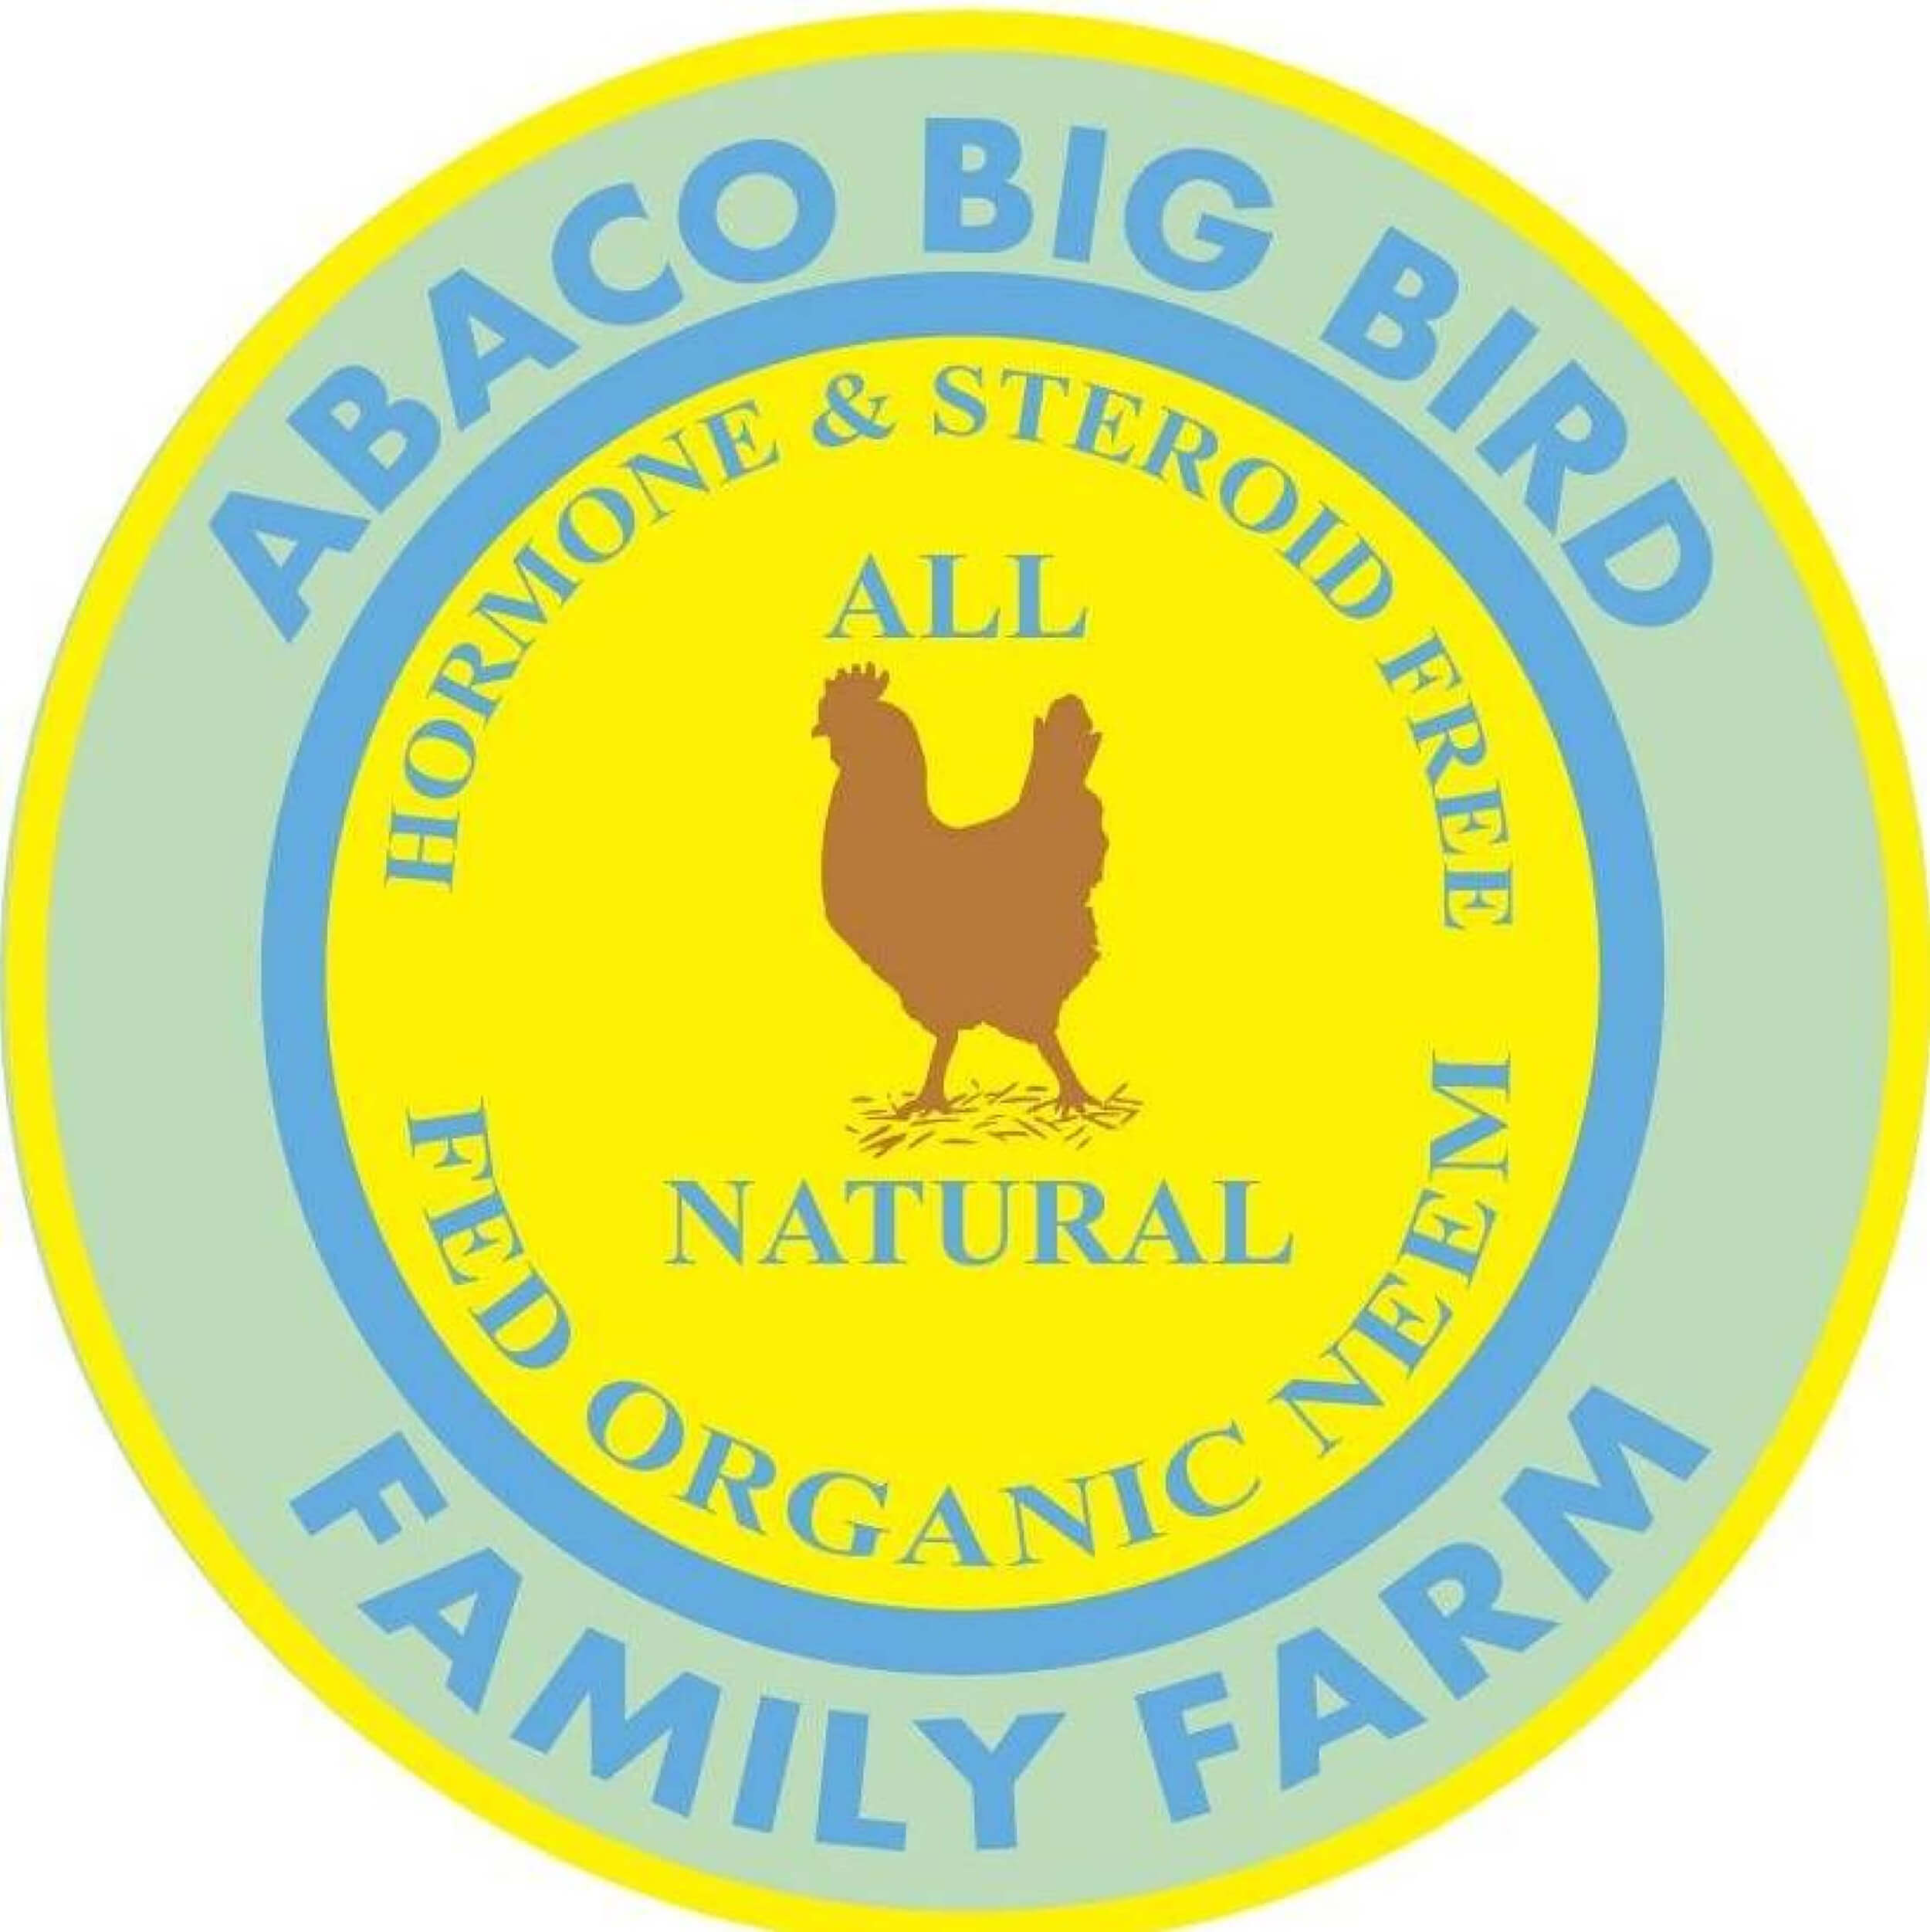 Logo of Abaco Big Bird, a local farm providing natural, organic poultry to The Abaco Club's sustainable coastal living experience.